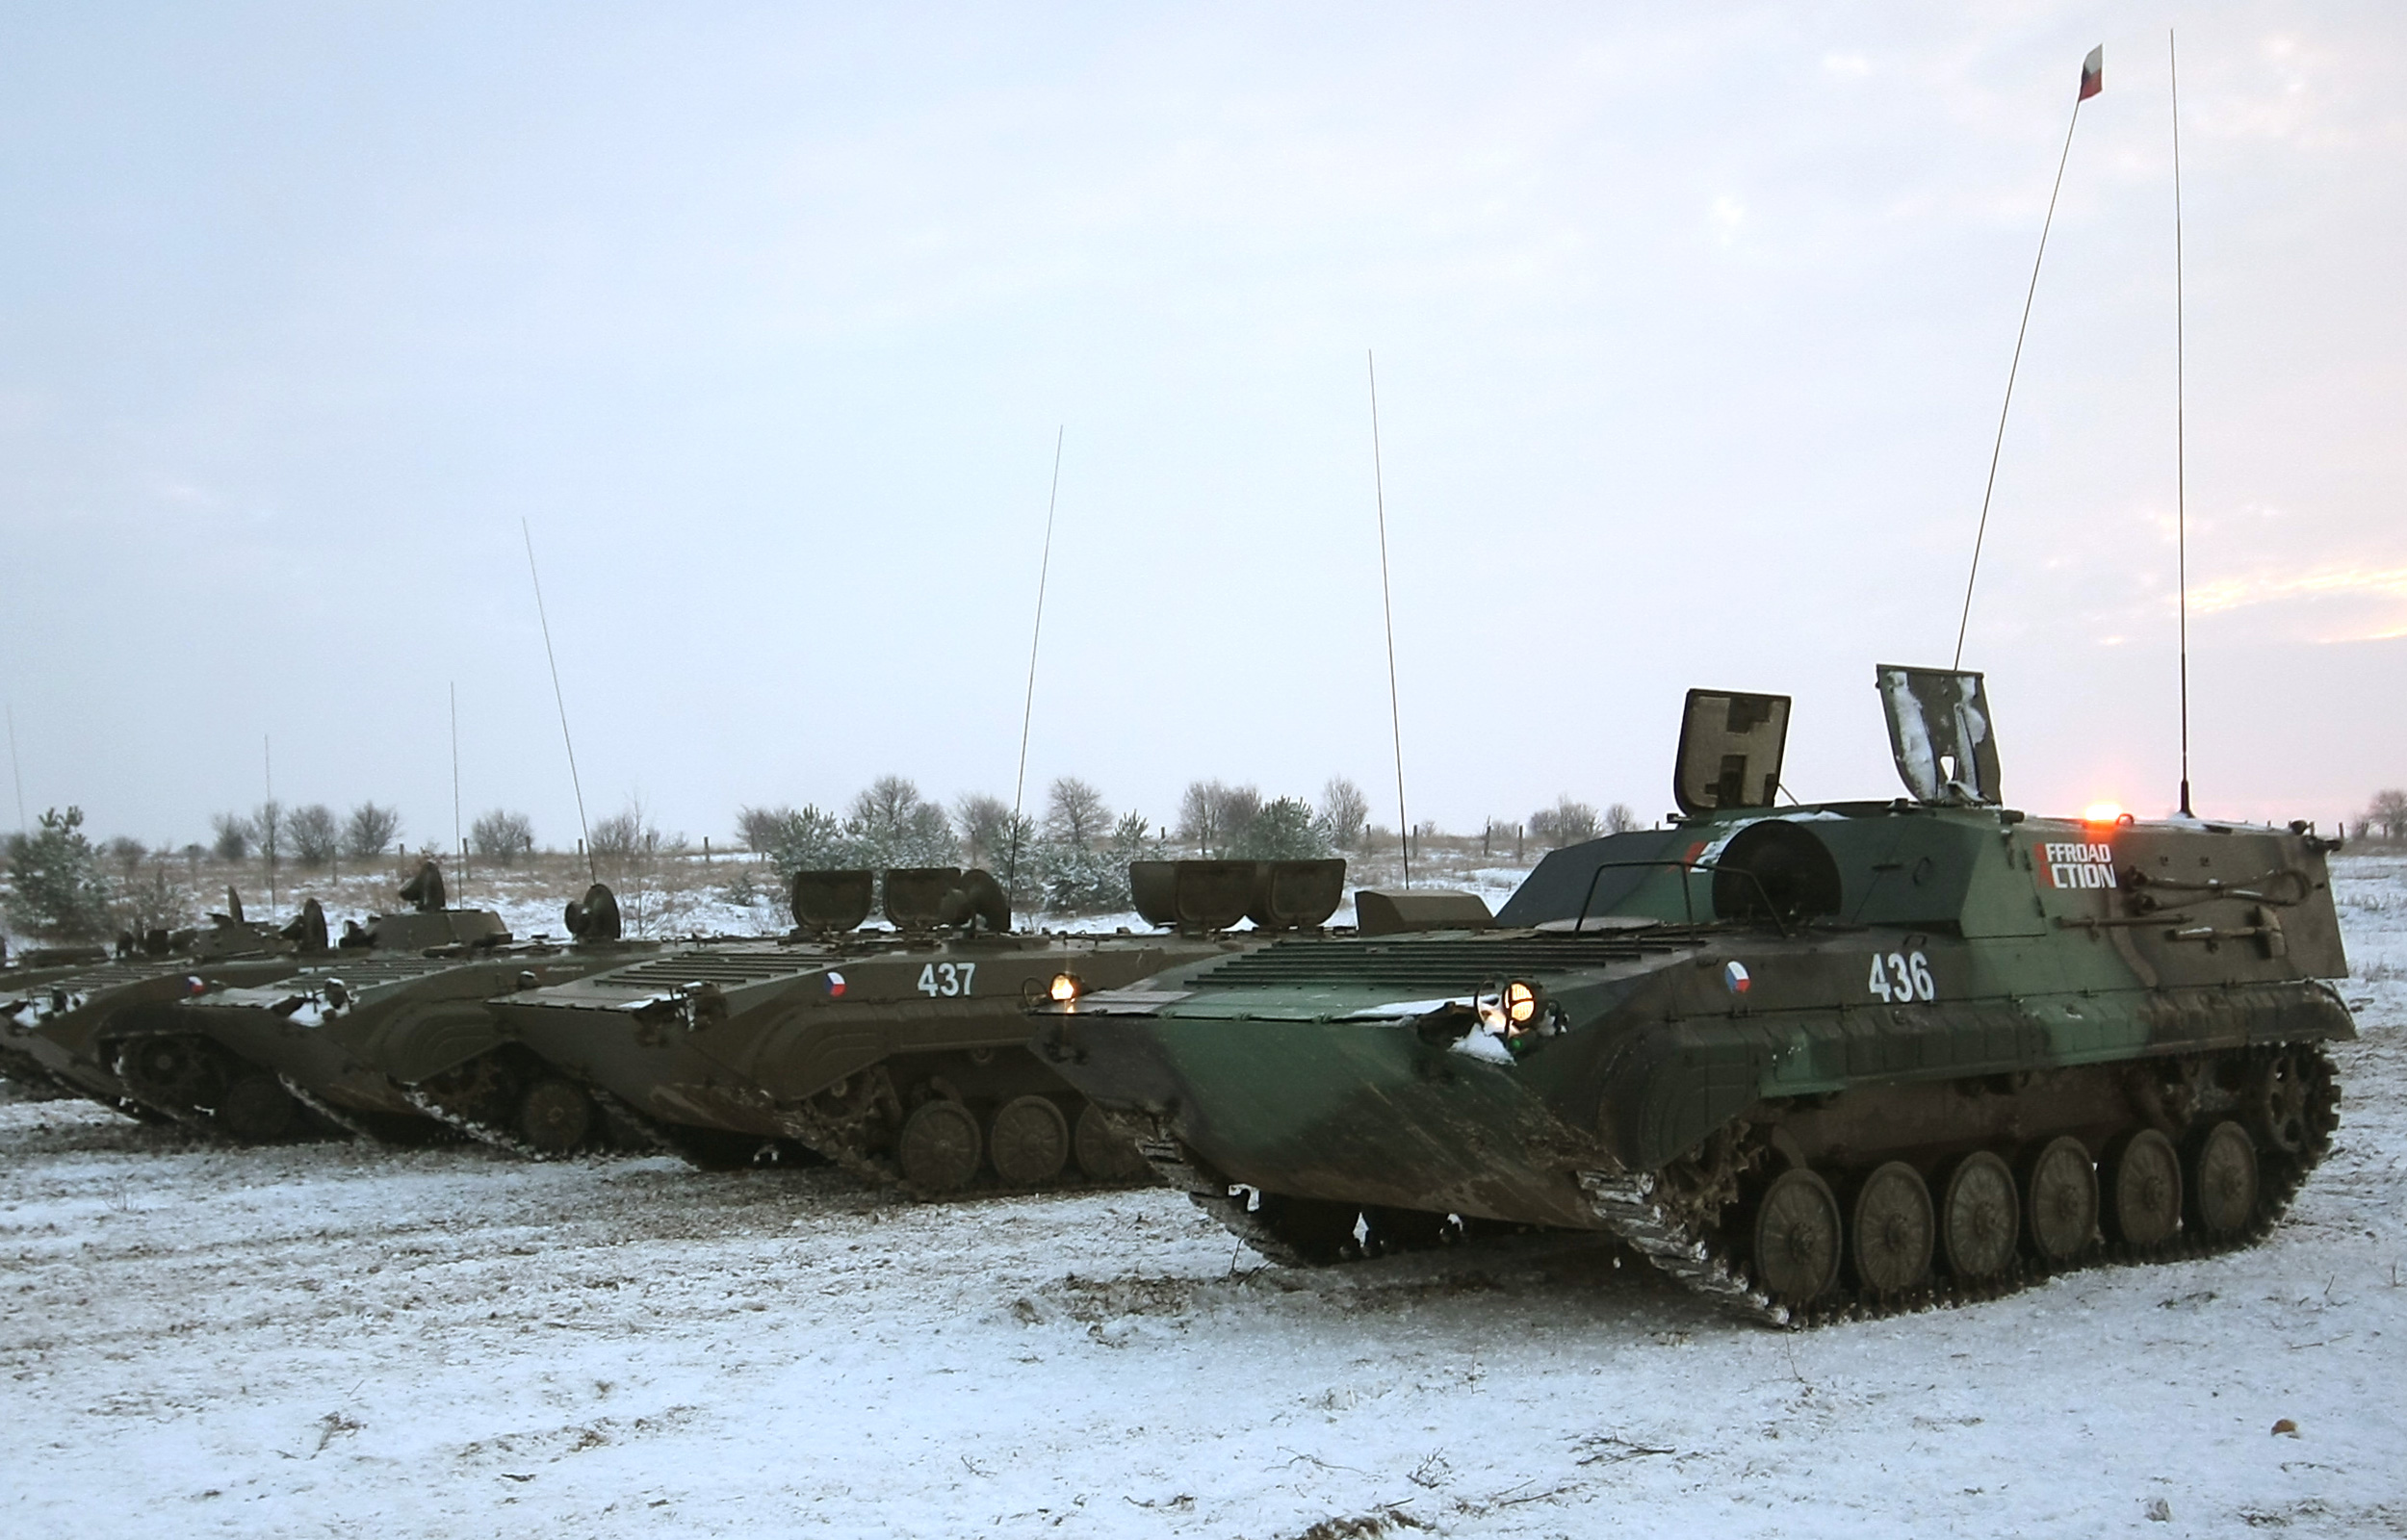 BMP-1 Infantry Fighting Vehicle